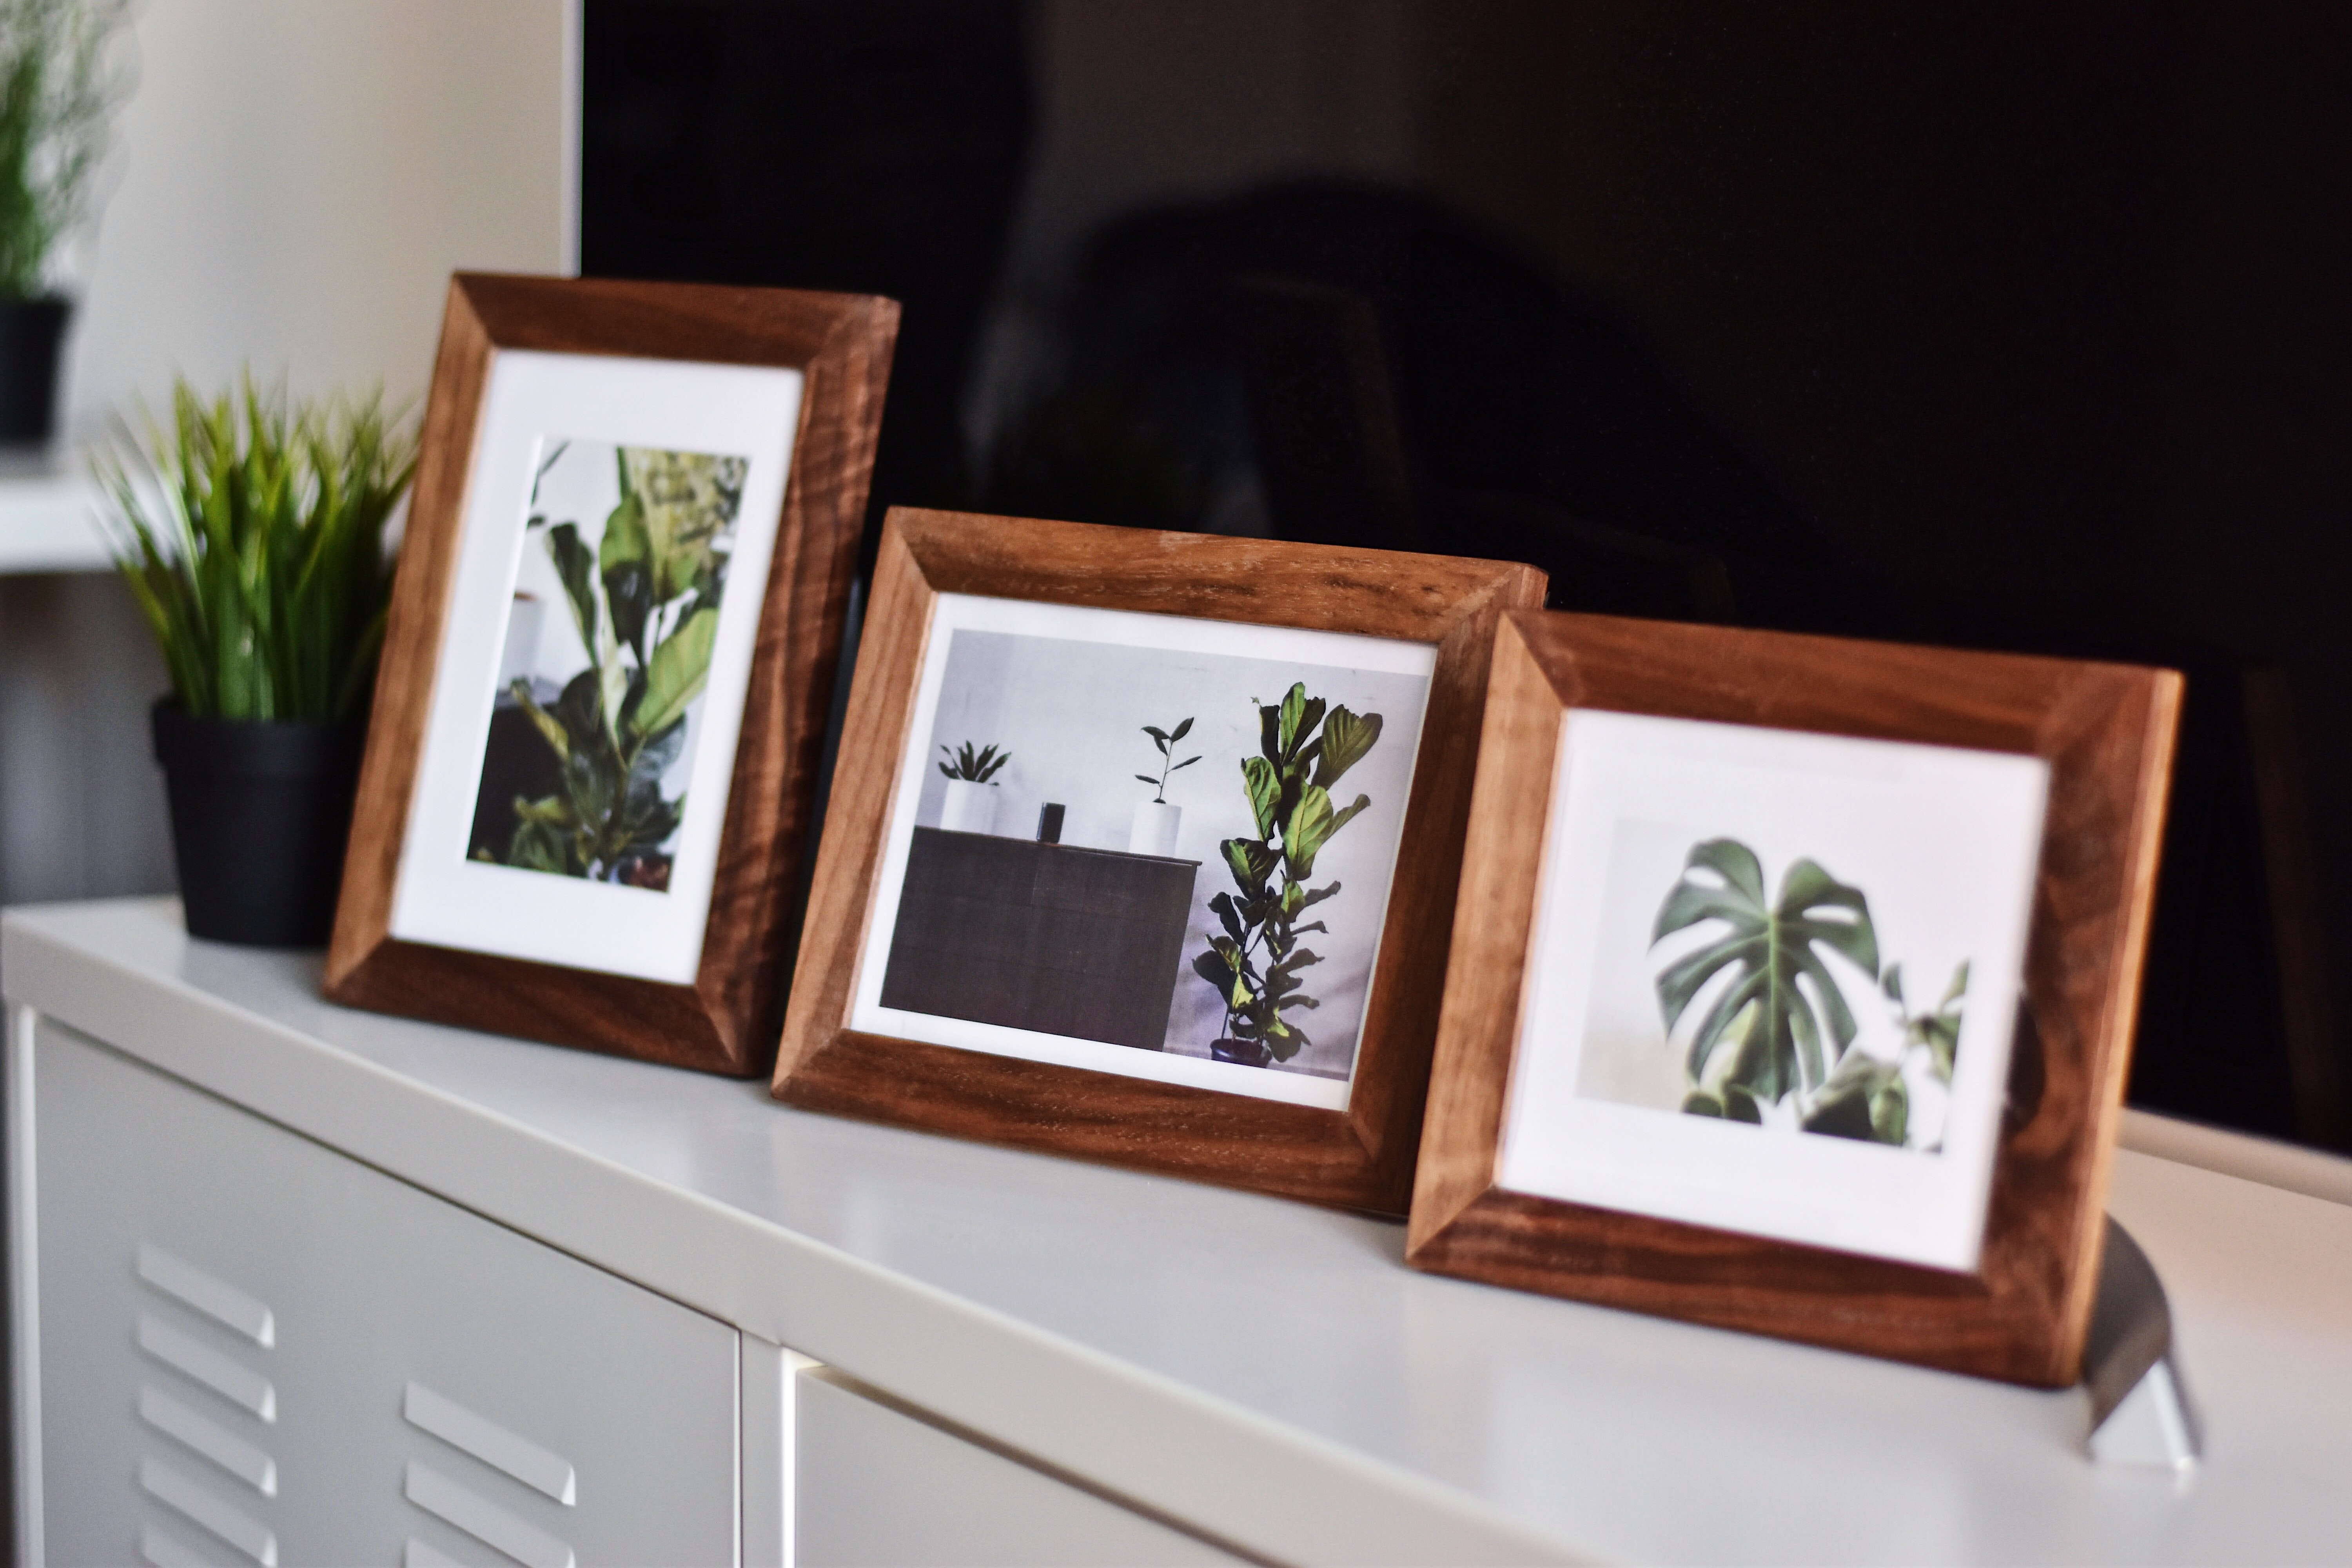 Three picture frames on a table.